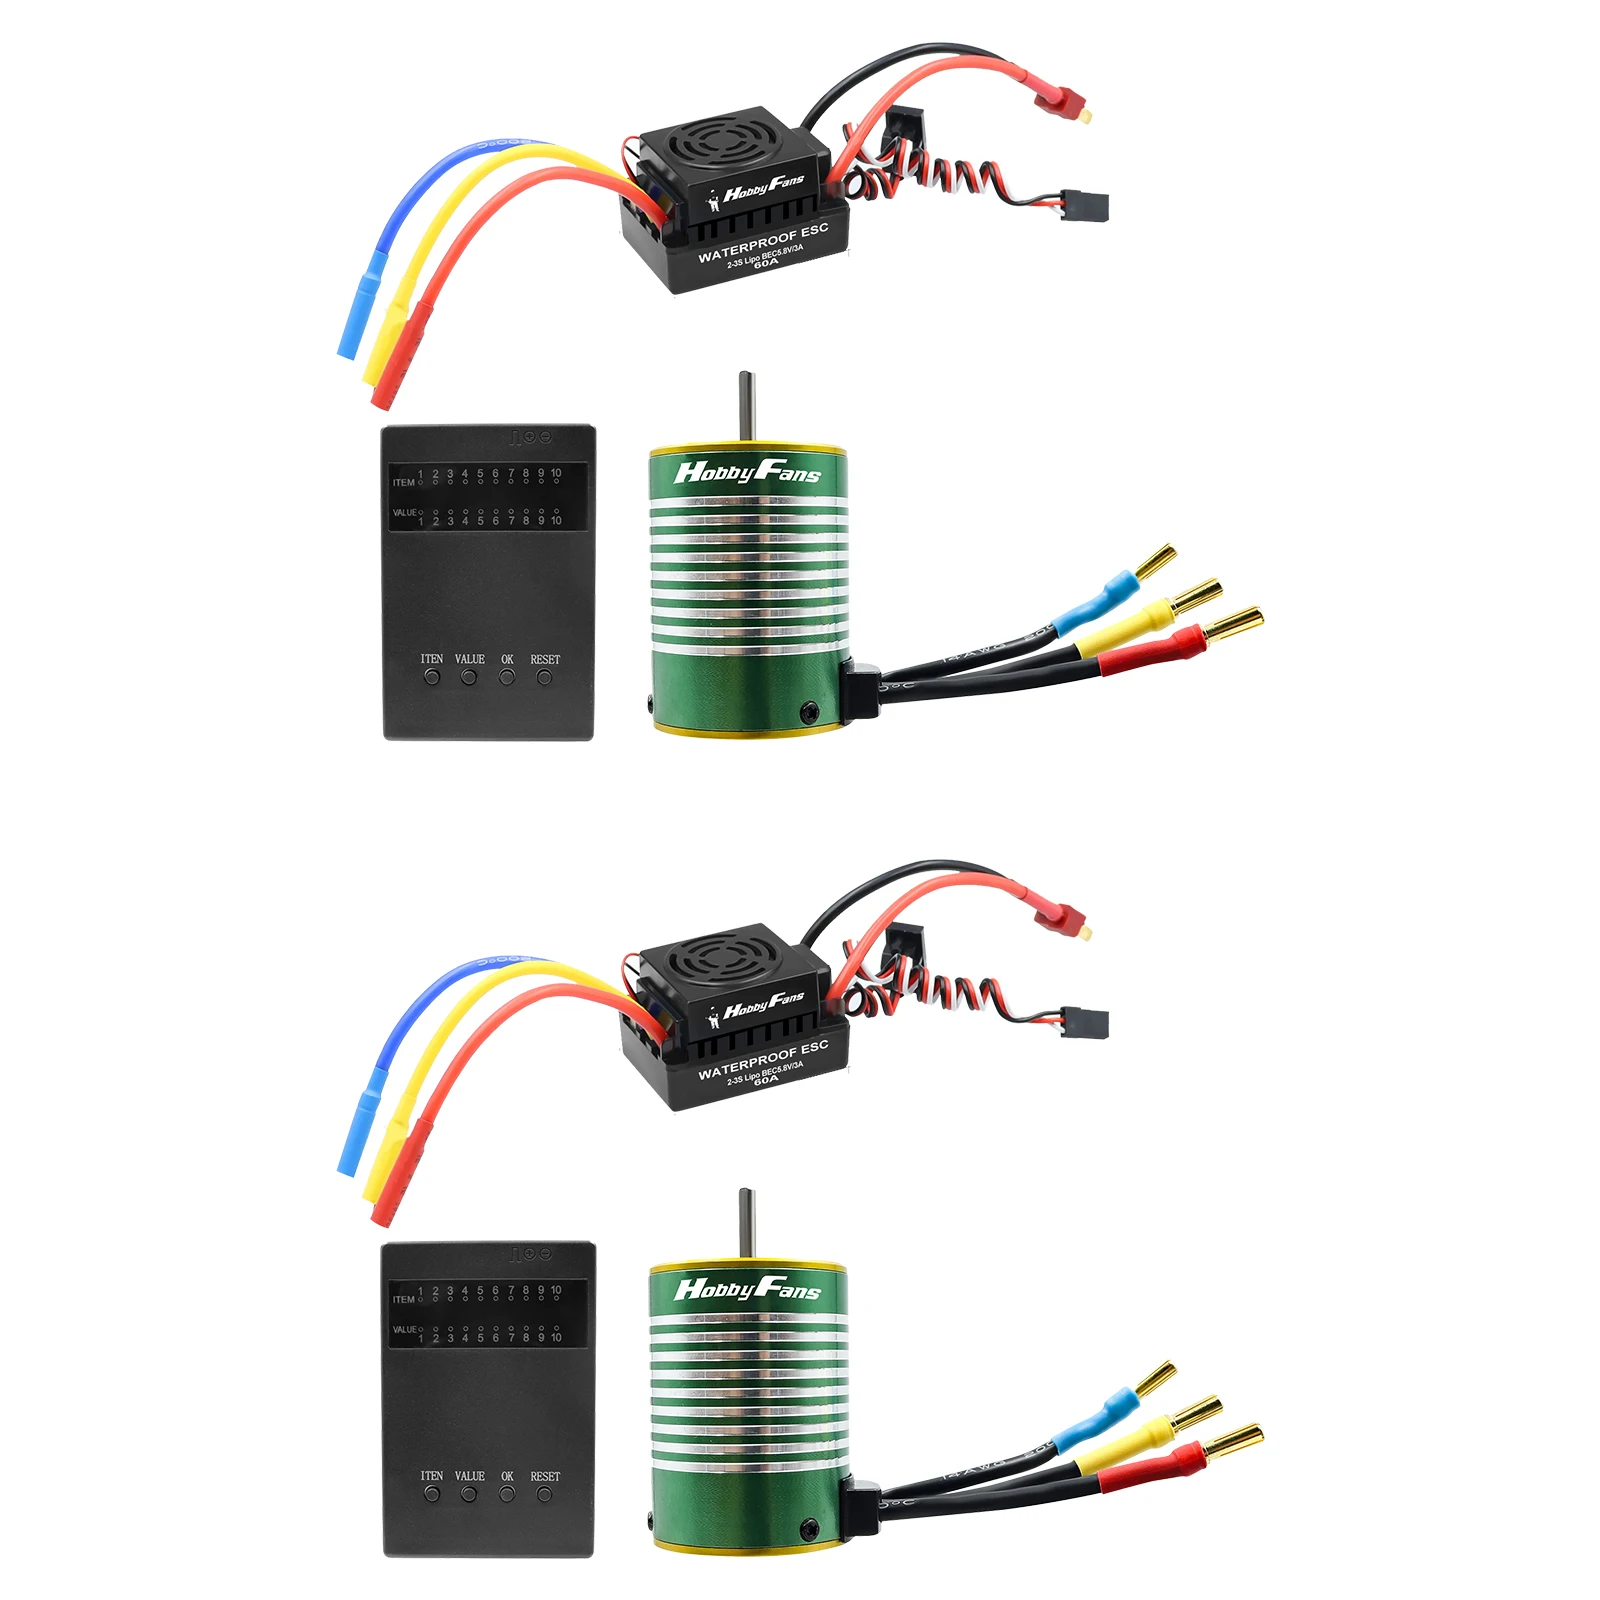 

Waterproof 3650 3900/4300KV Brushless Motor with 60A ESC 5.8V 3A BEC Programming Card Set for 1/8 1/10 RC Cars